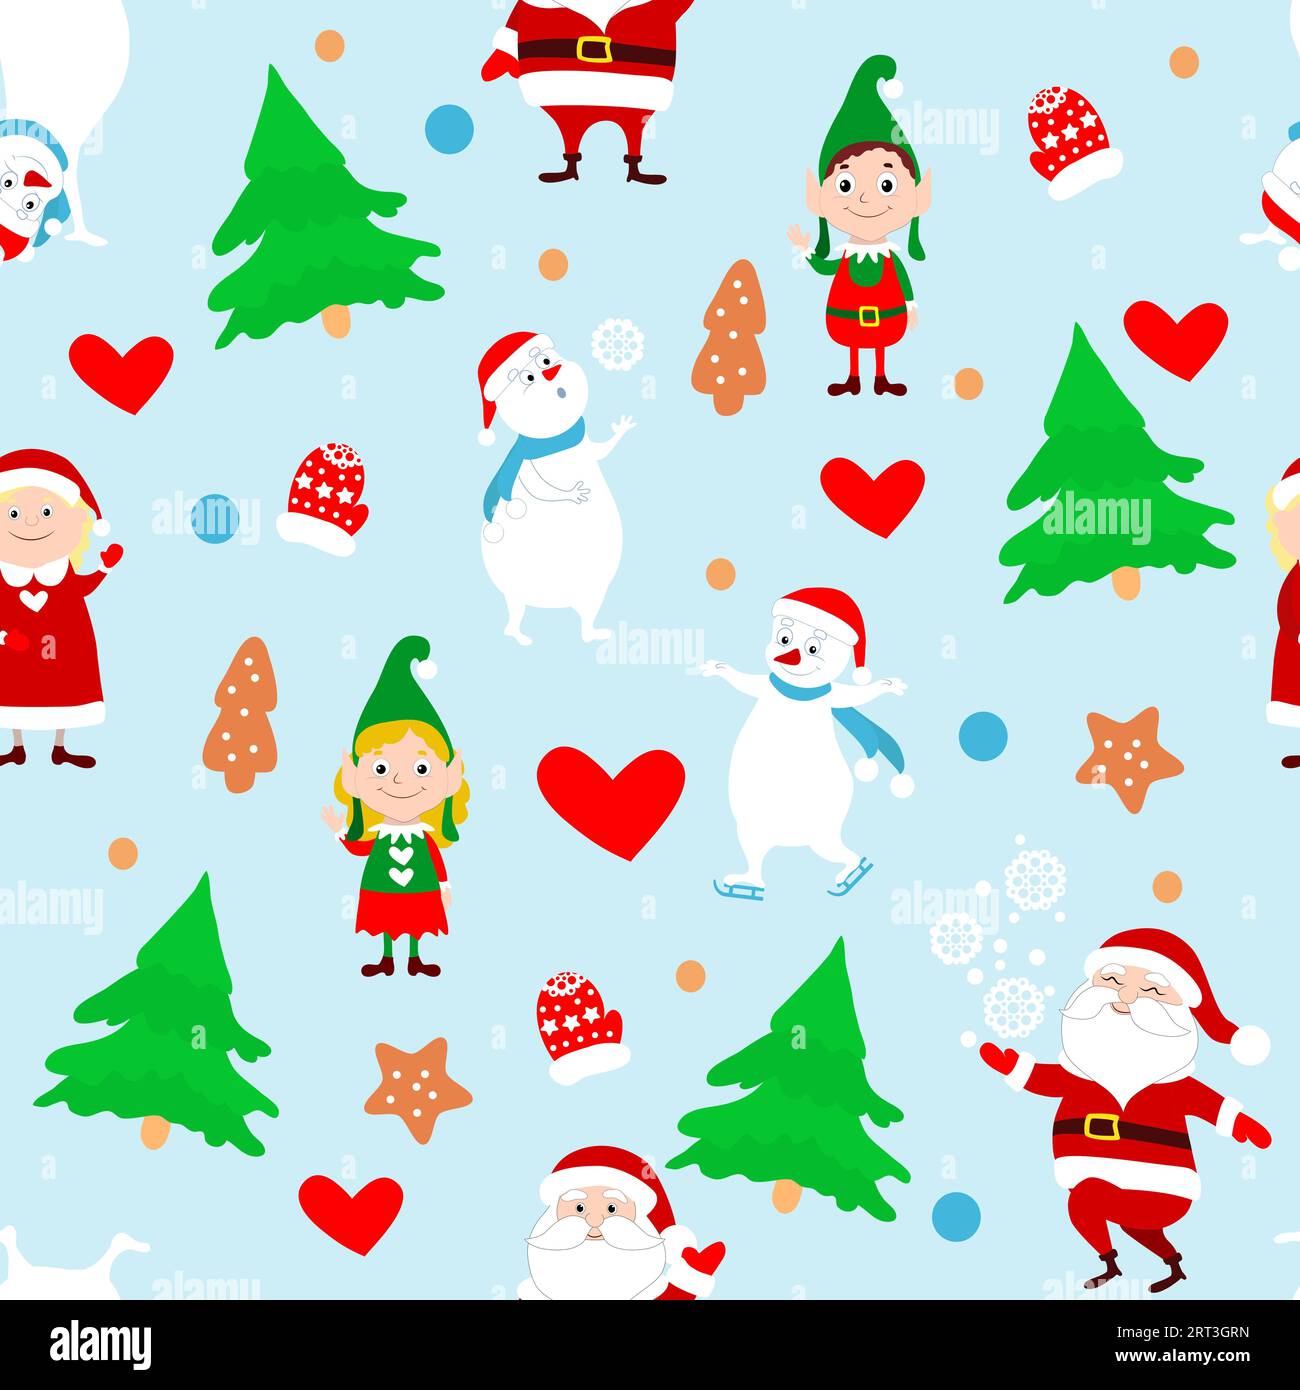 New Year and Christmas seamless pattern. Santa Claus, Mrs. Santa, elves, snowmen, Christmas trees, mittens and gingerbread cookies in cartoon style. Stock Vector